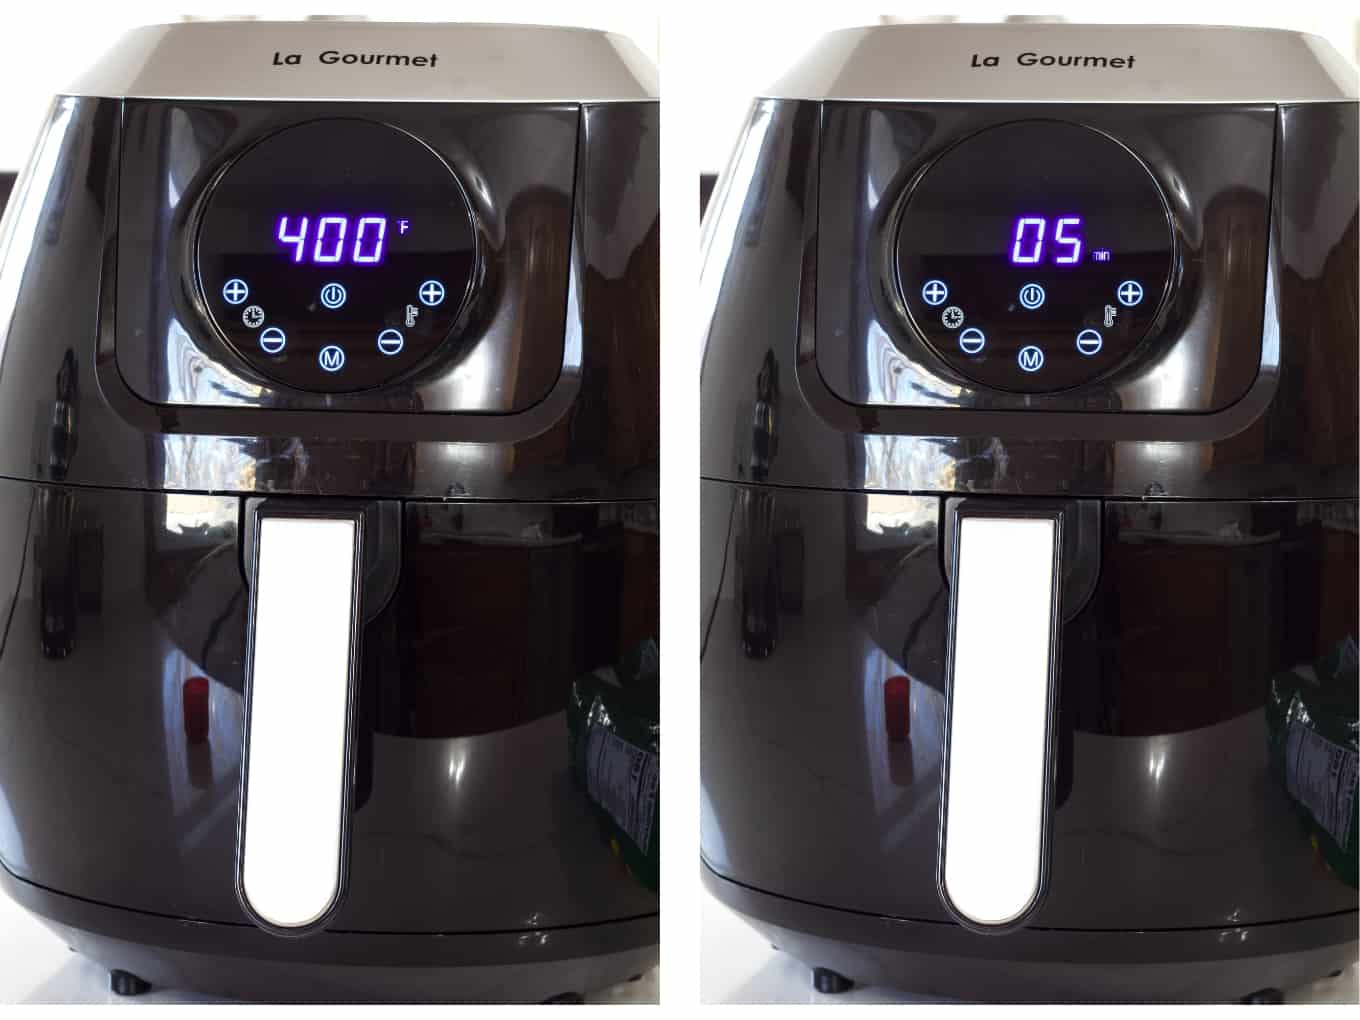 Side by side images of the air fryer, the one on the left has the temperature on it and the one on the left has the time it takes to cook the onion rings on it.